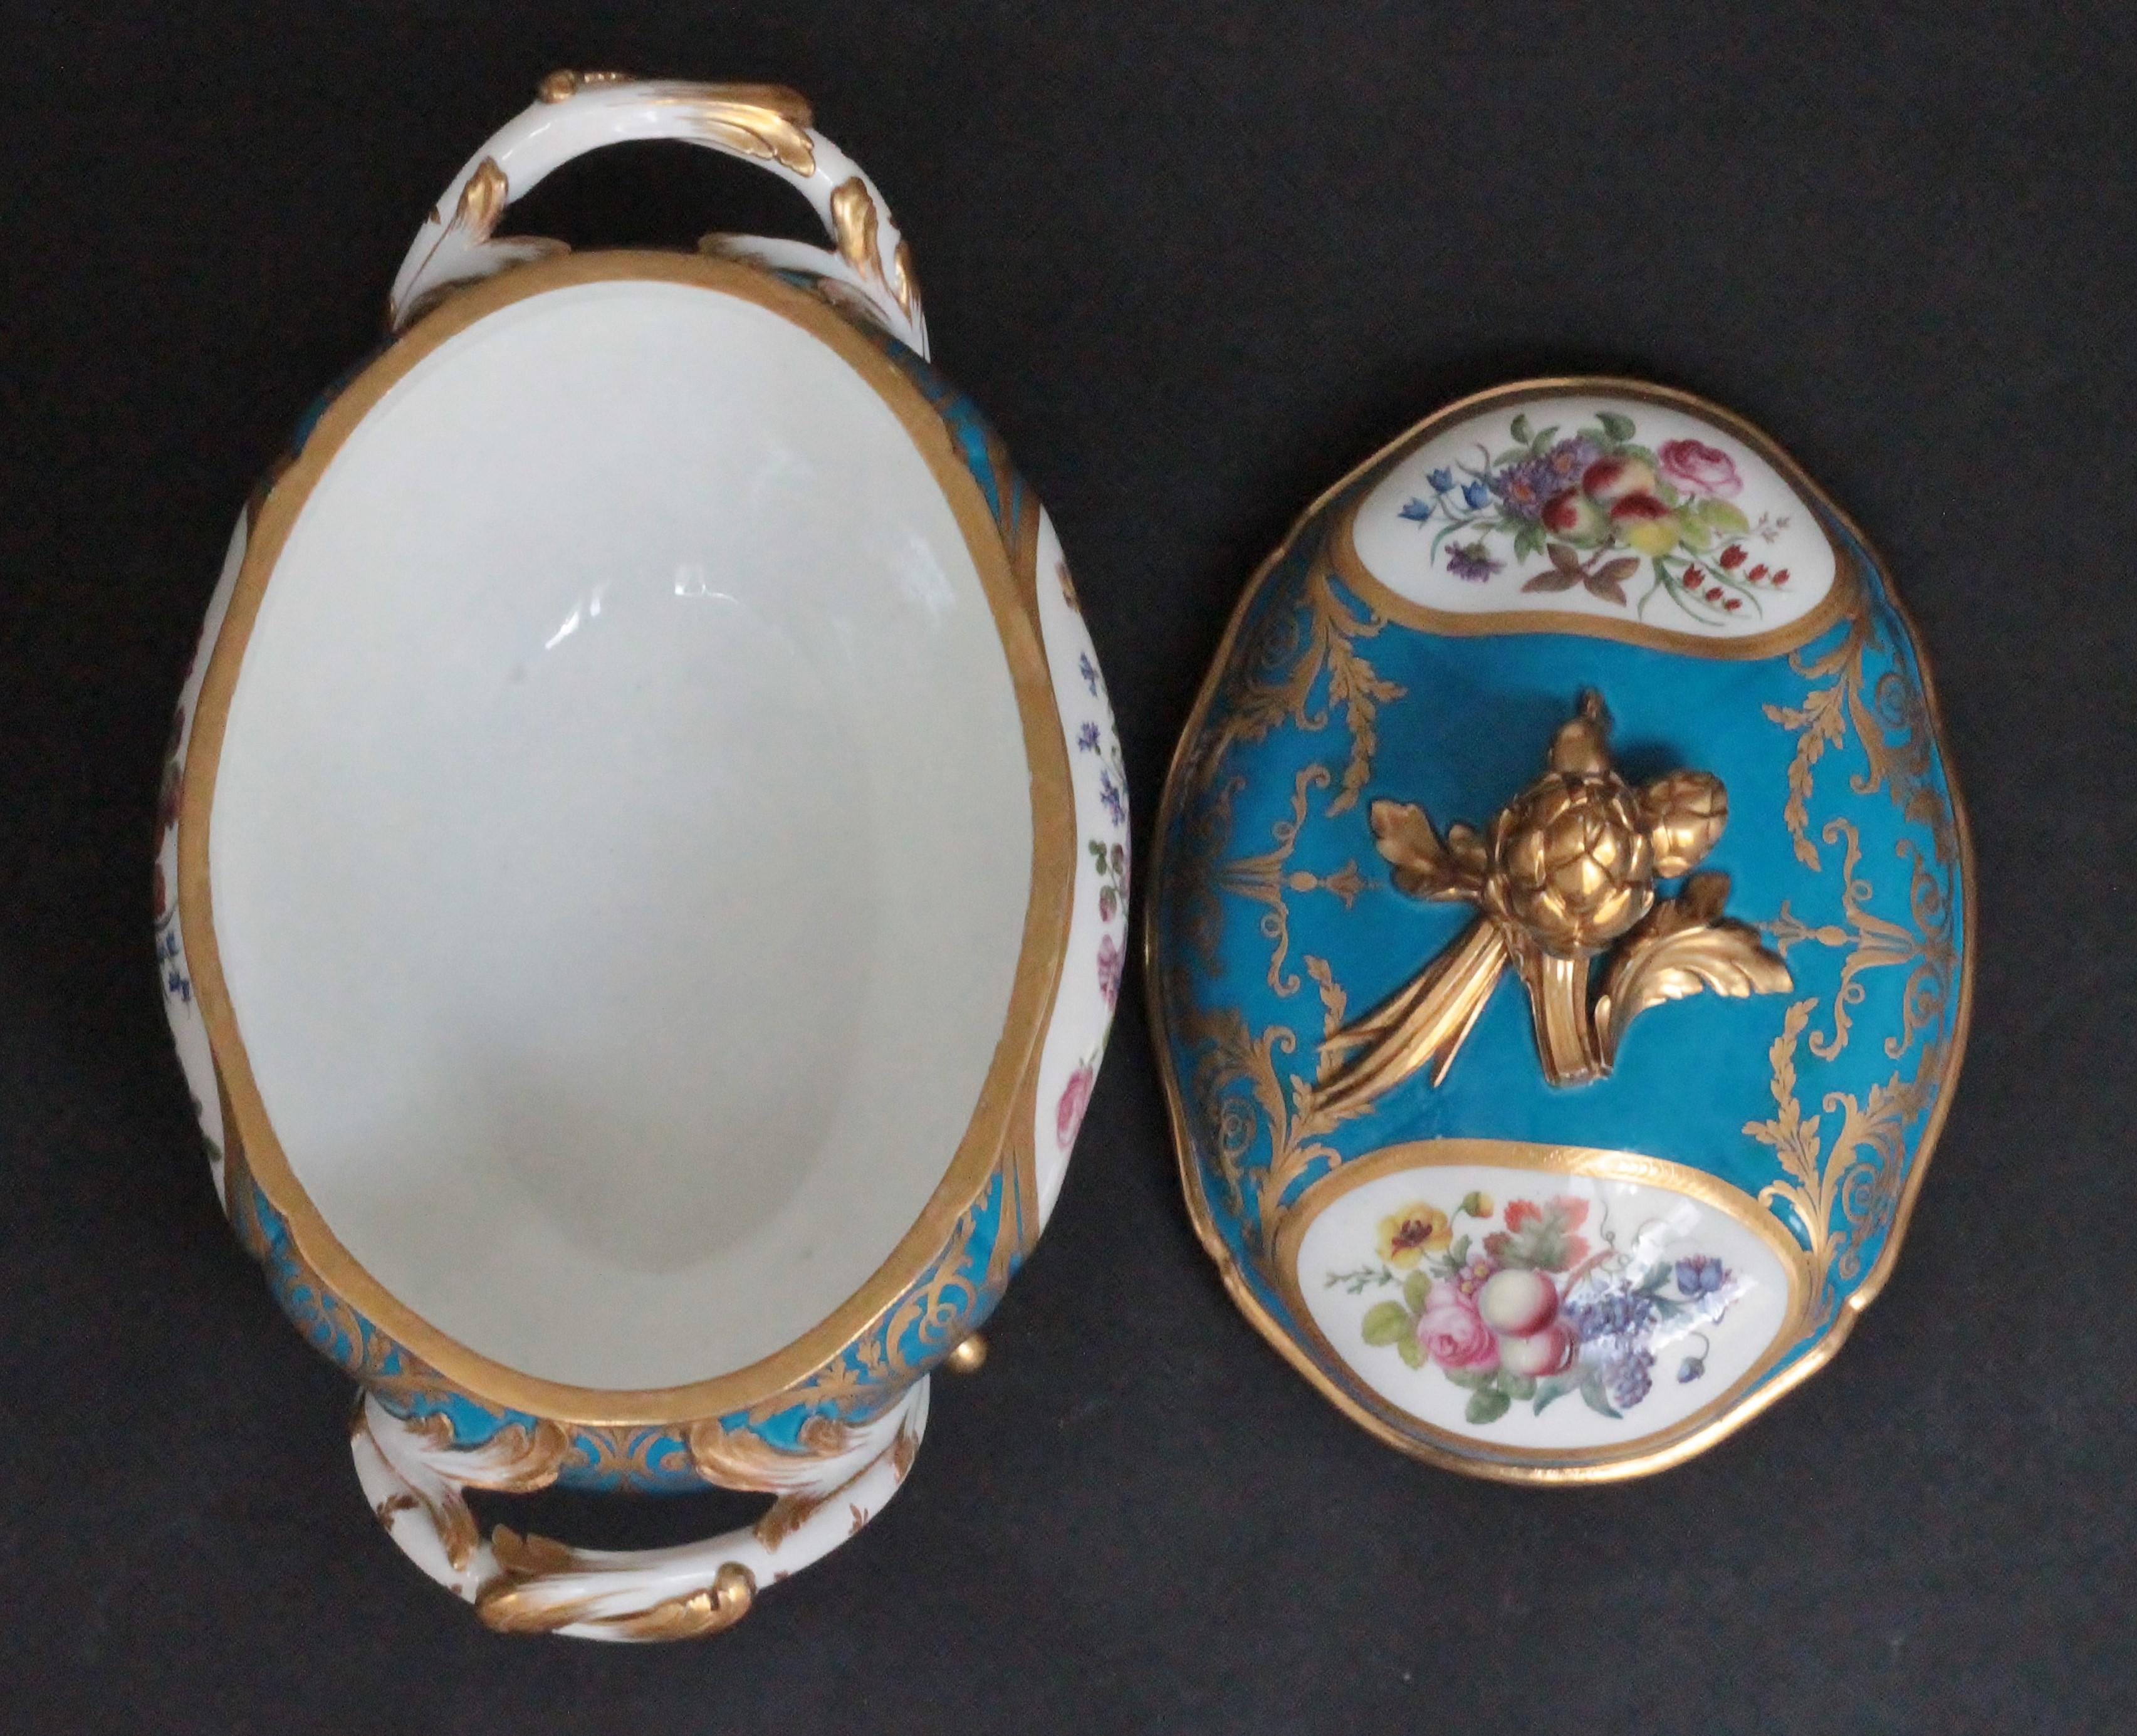 Oval Tureen and Cover of Sevres Porcelain, Turquoise Blue Ground, 18th Century 2